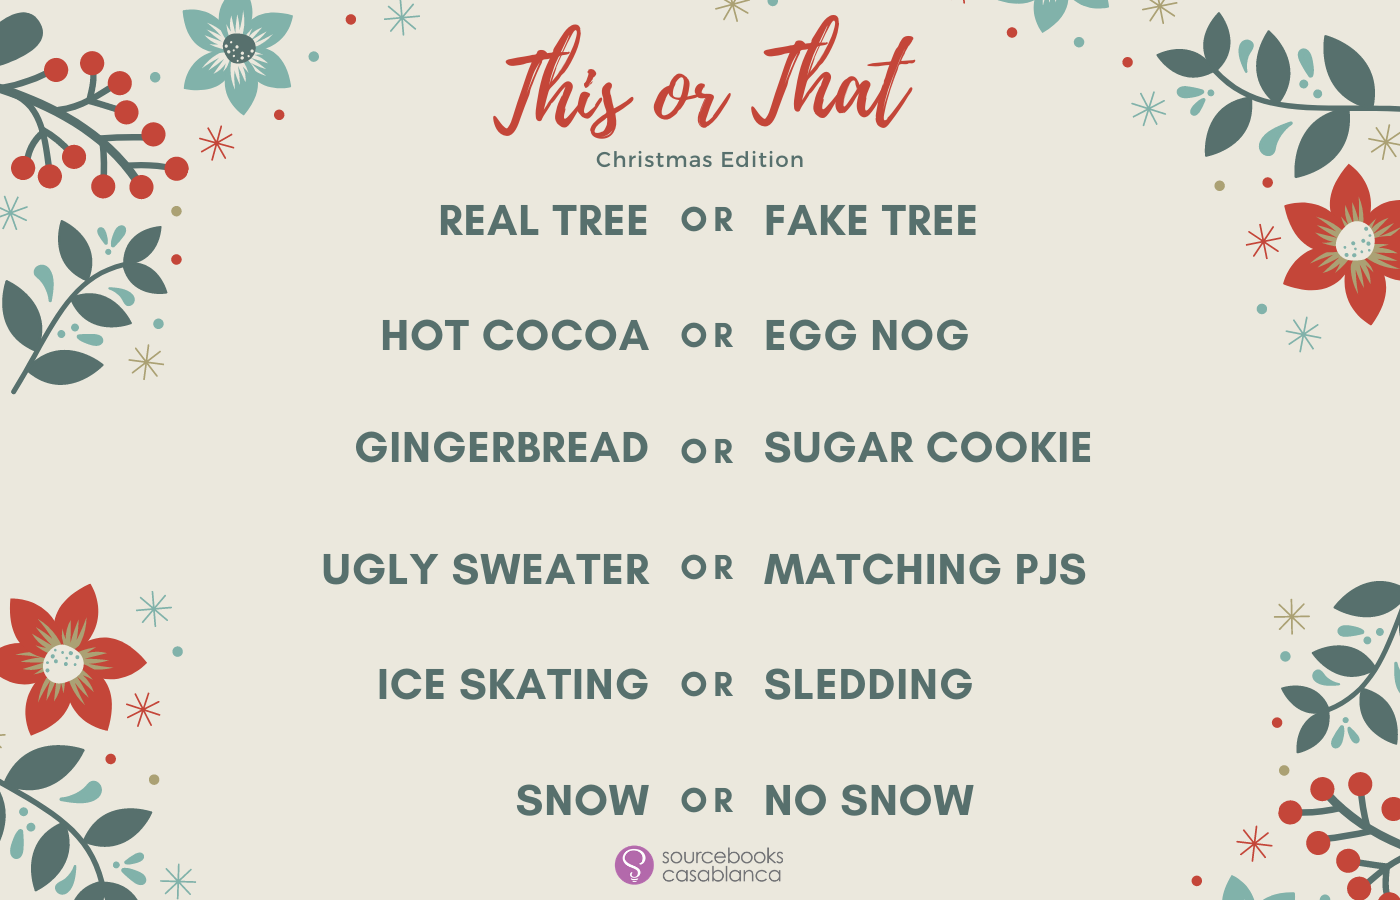 A Soccer Mom's Book Blog: This or That Christmas Edition